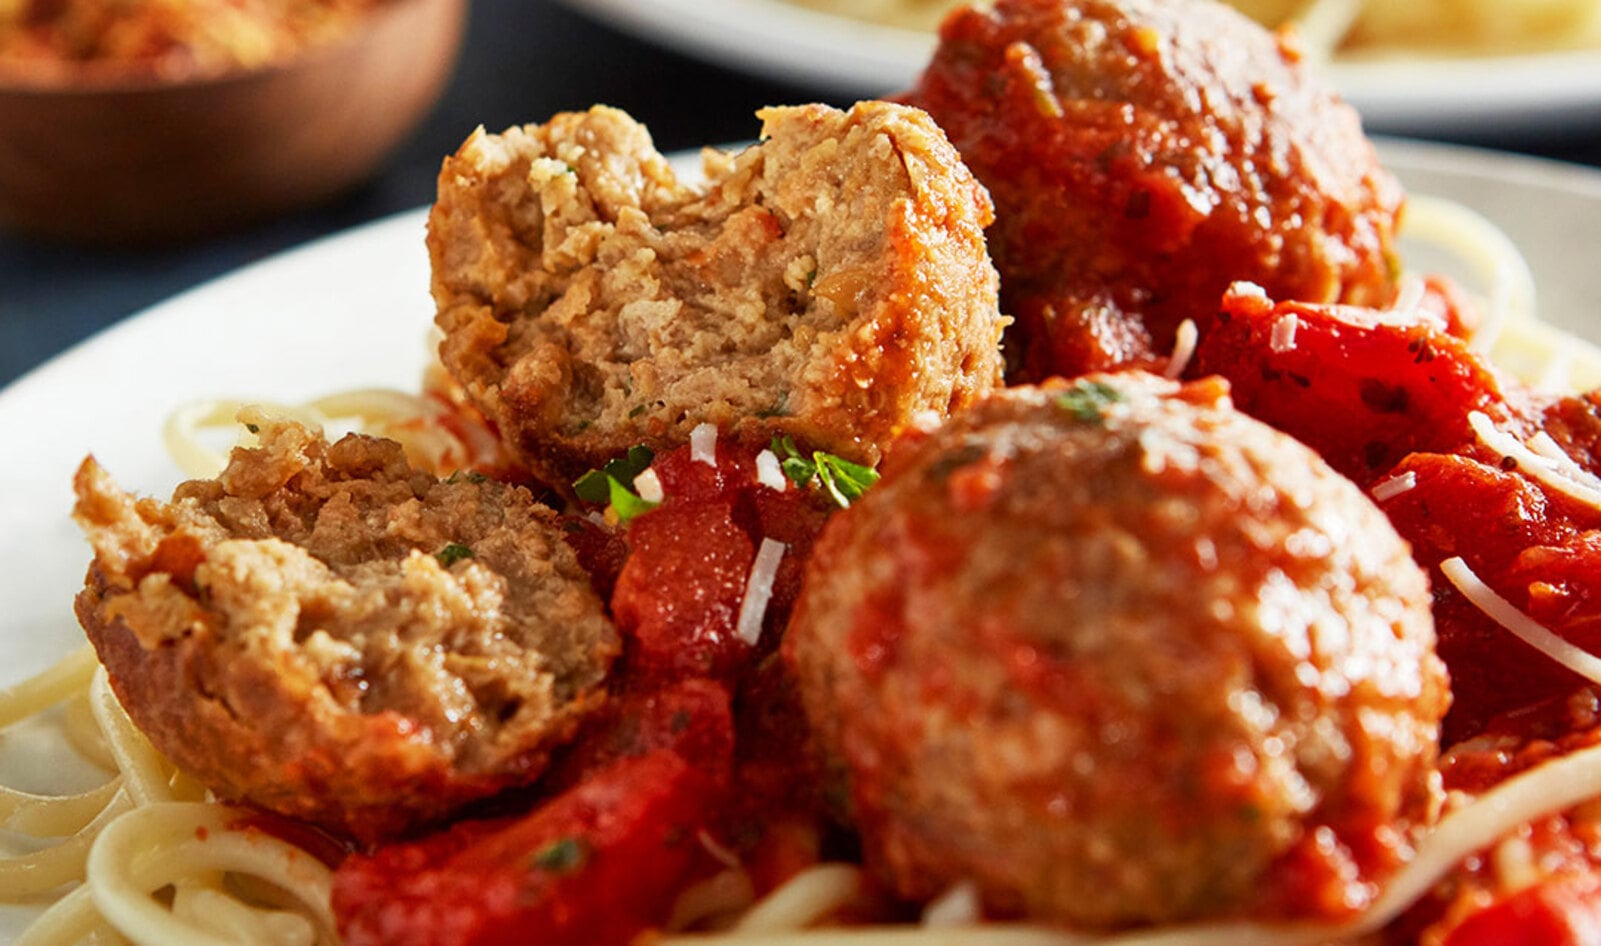 Old World Italian Brand MamaMancini and Beyond Meat Partner to Launch Vegan Meatballs&nbsp;